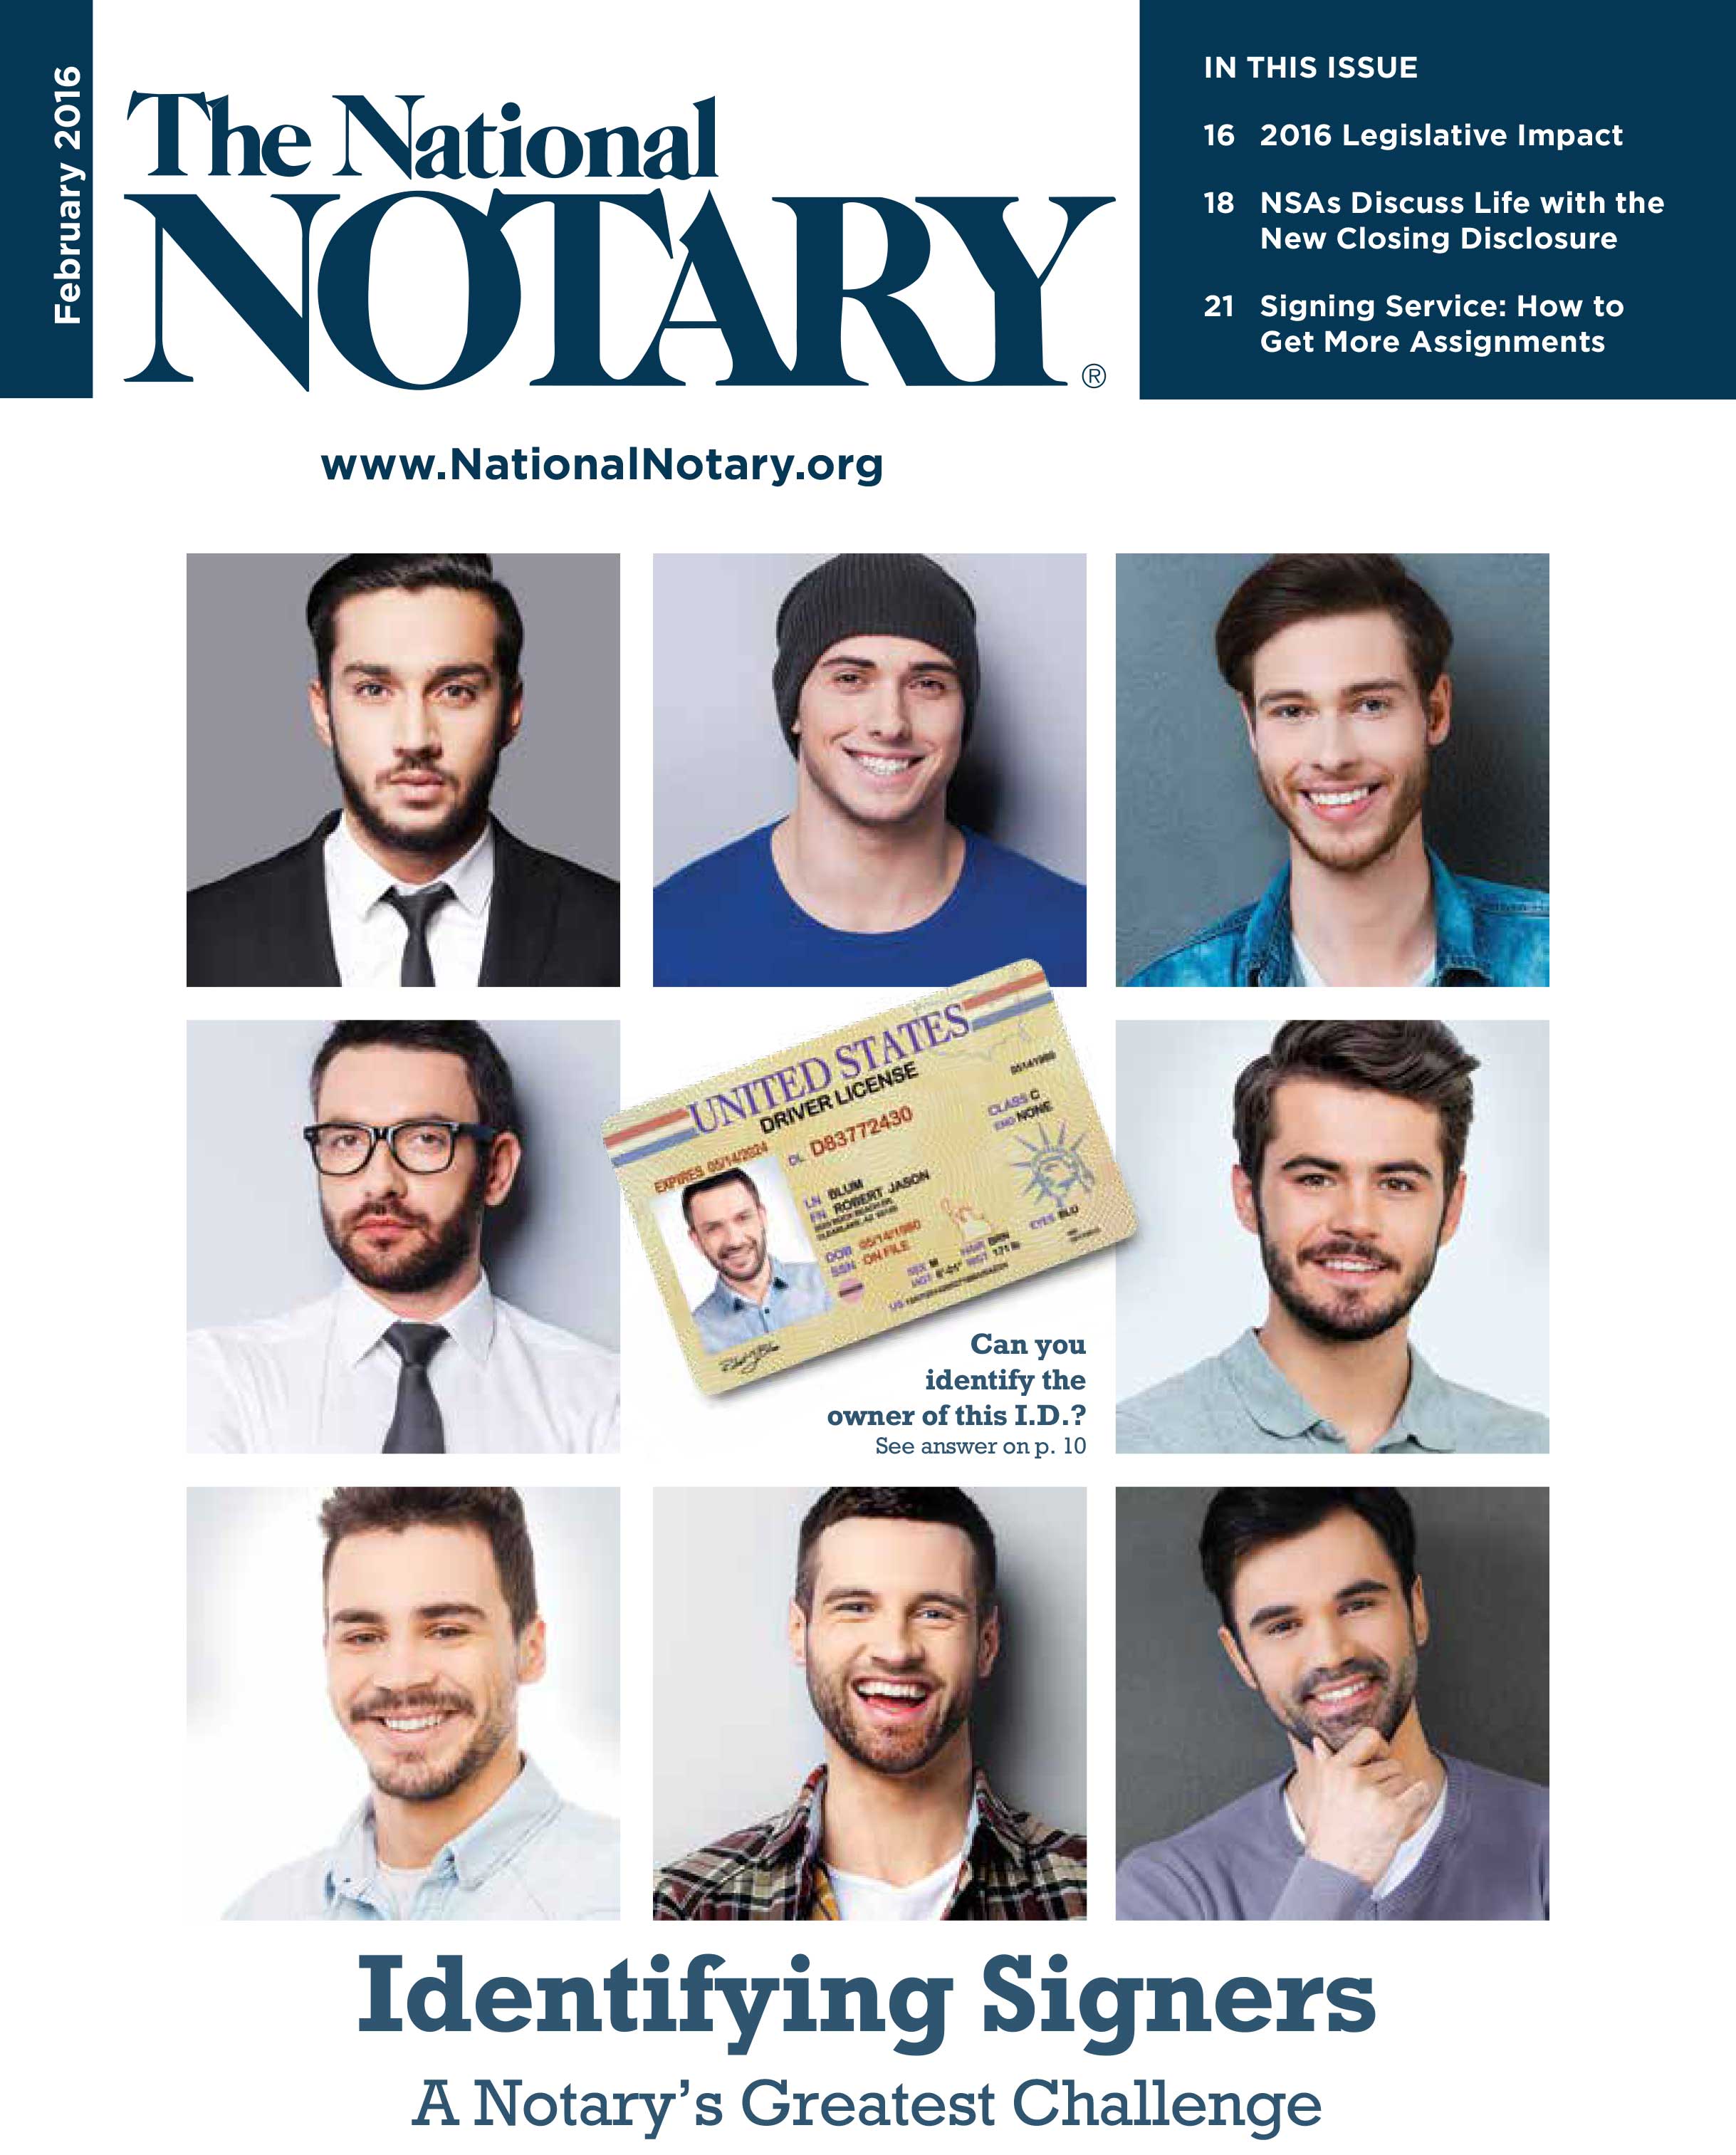 The National Notary - February 2016